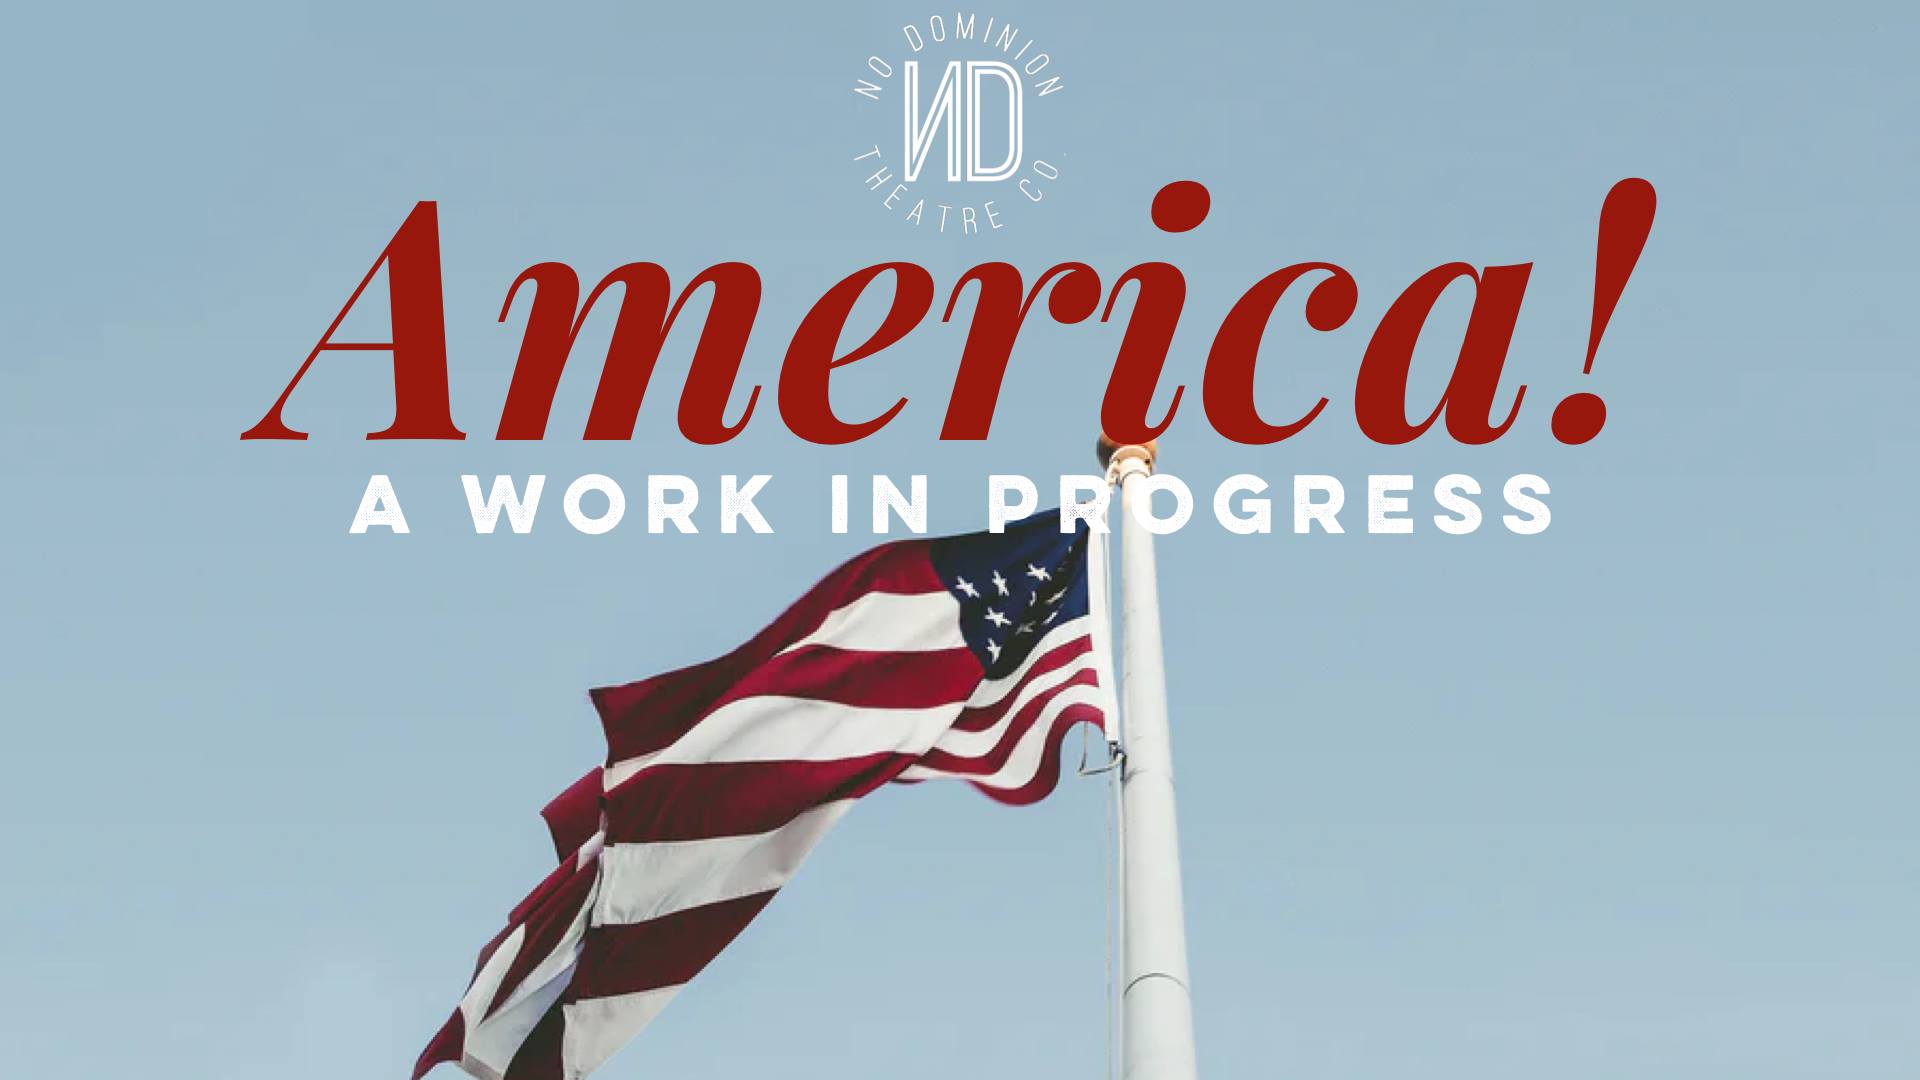 Image of the american flag with the text "America! A Work In Progress" and the No Dominion Theatre Co logo